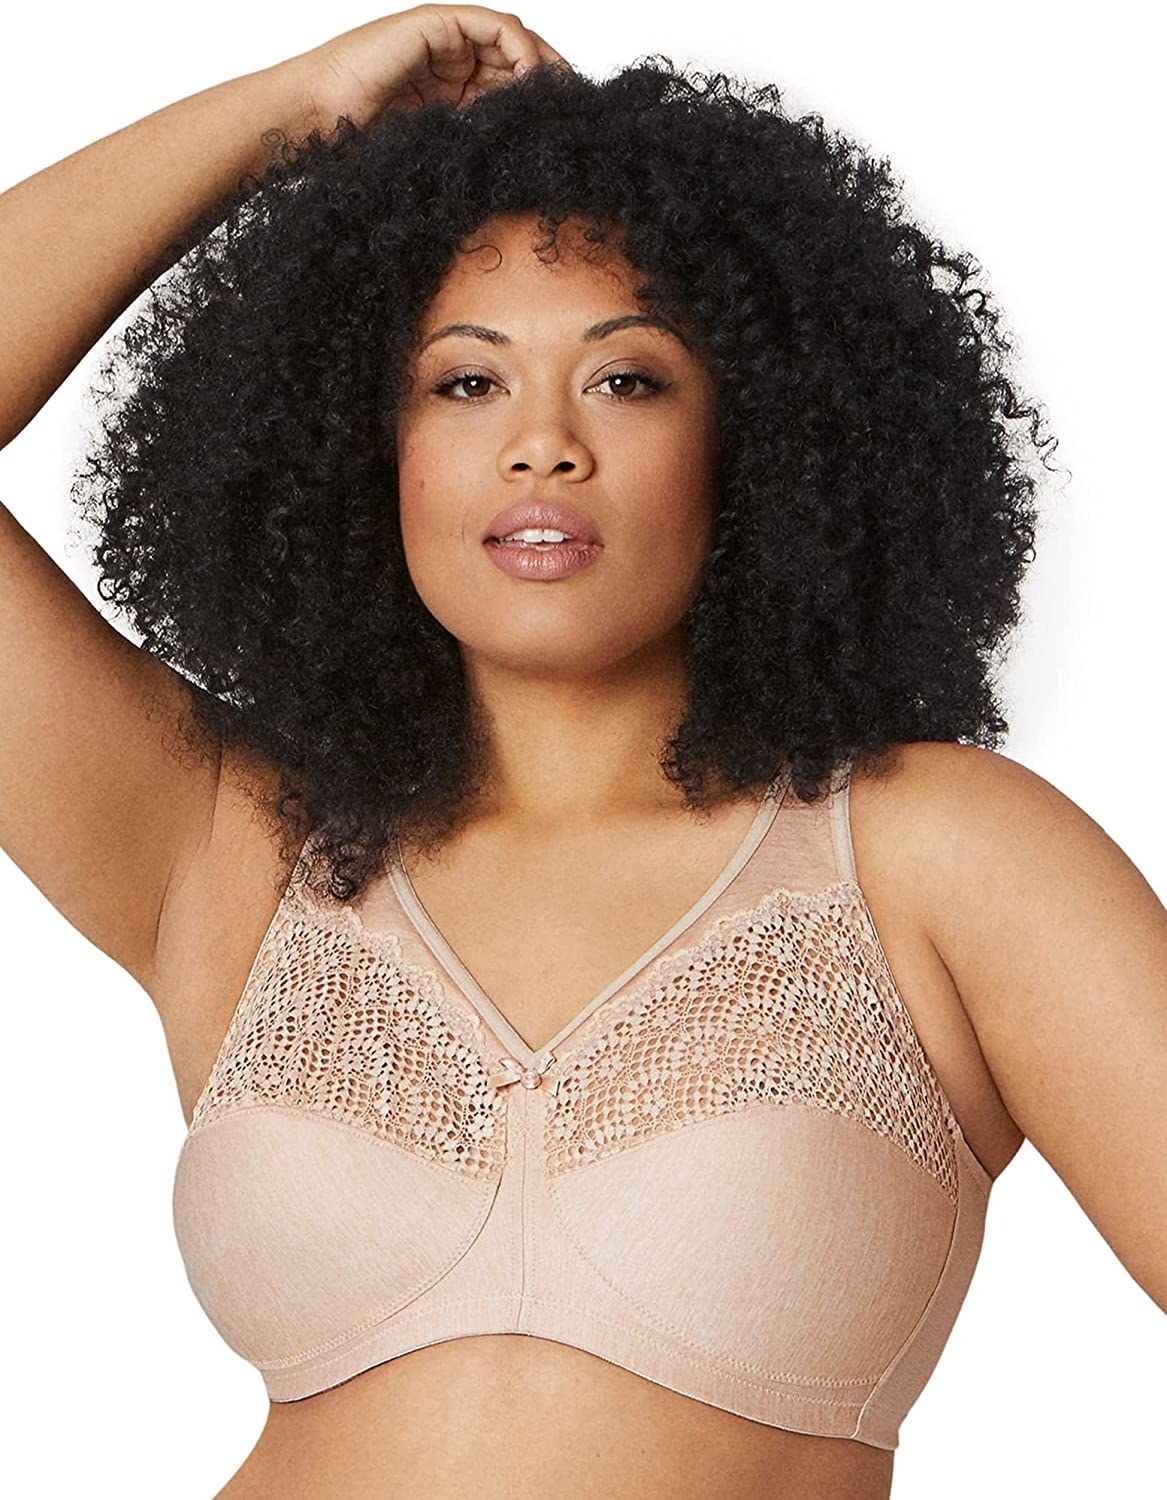 FAFWYP Women's Plus Size Wireless Bras for Large Bust Full Coverage  Everyday Sports Bras No Underwire Comfort Push Up Lace Bralettes Sleeping  Seamless